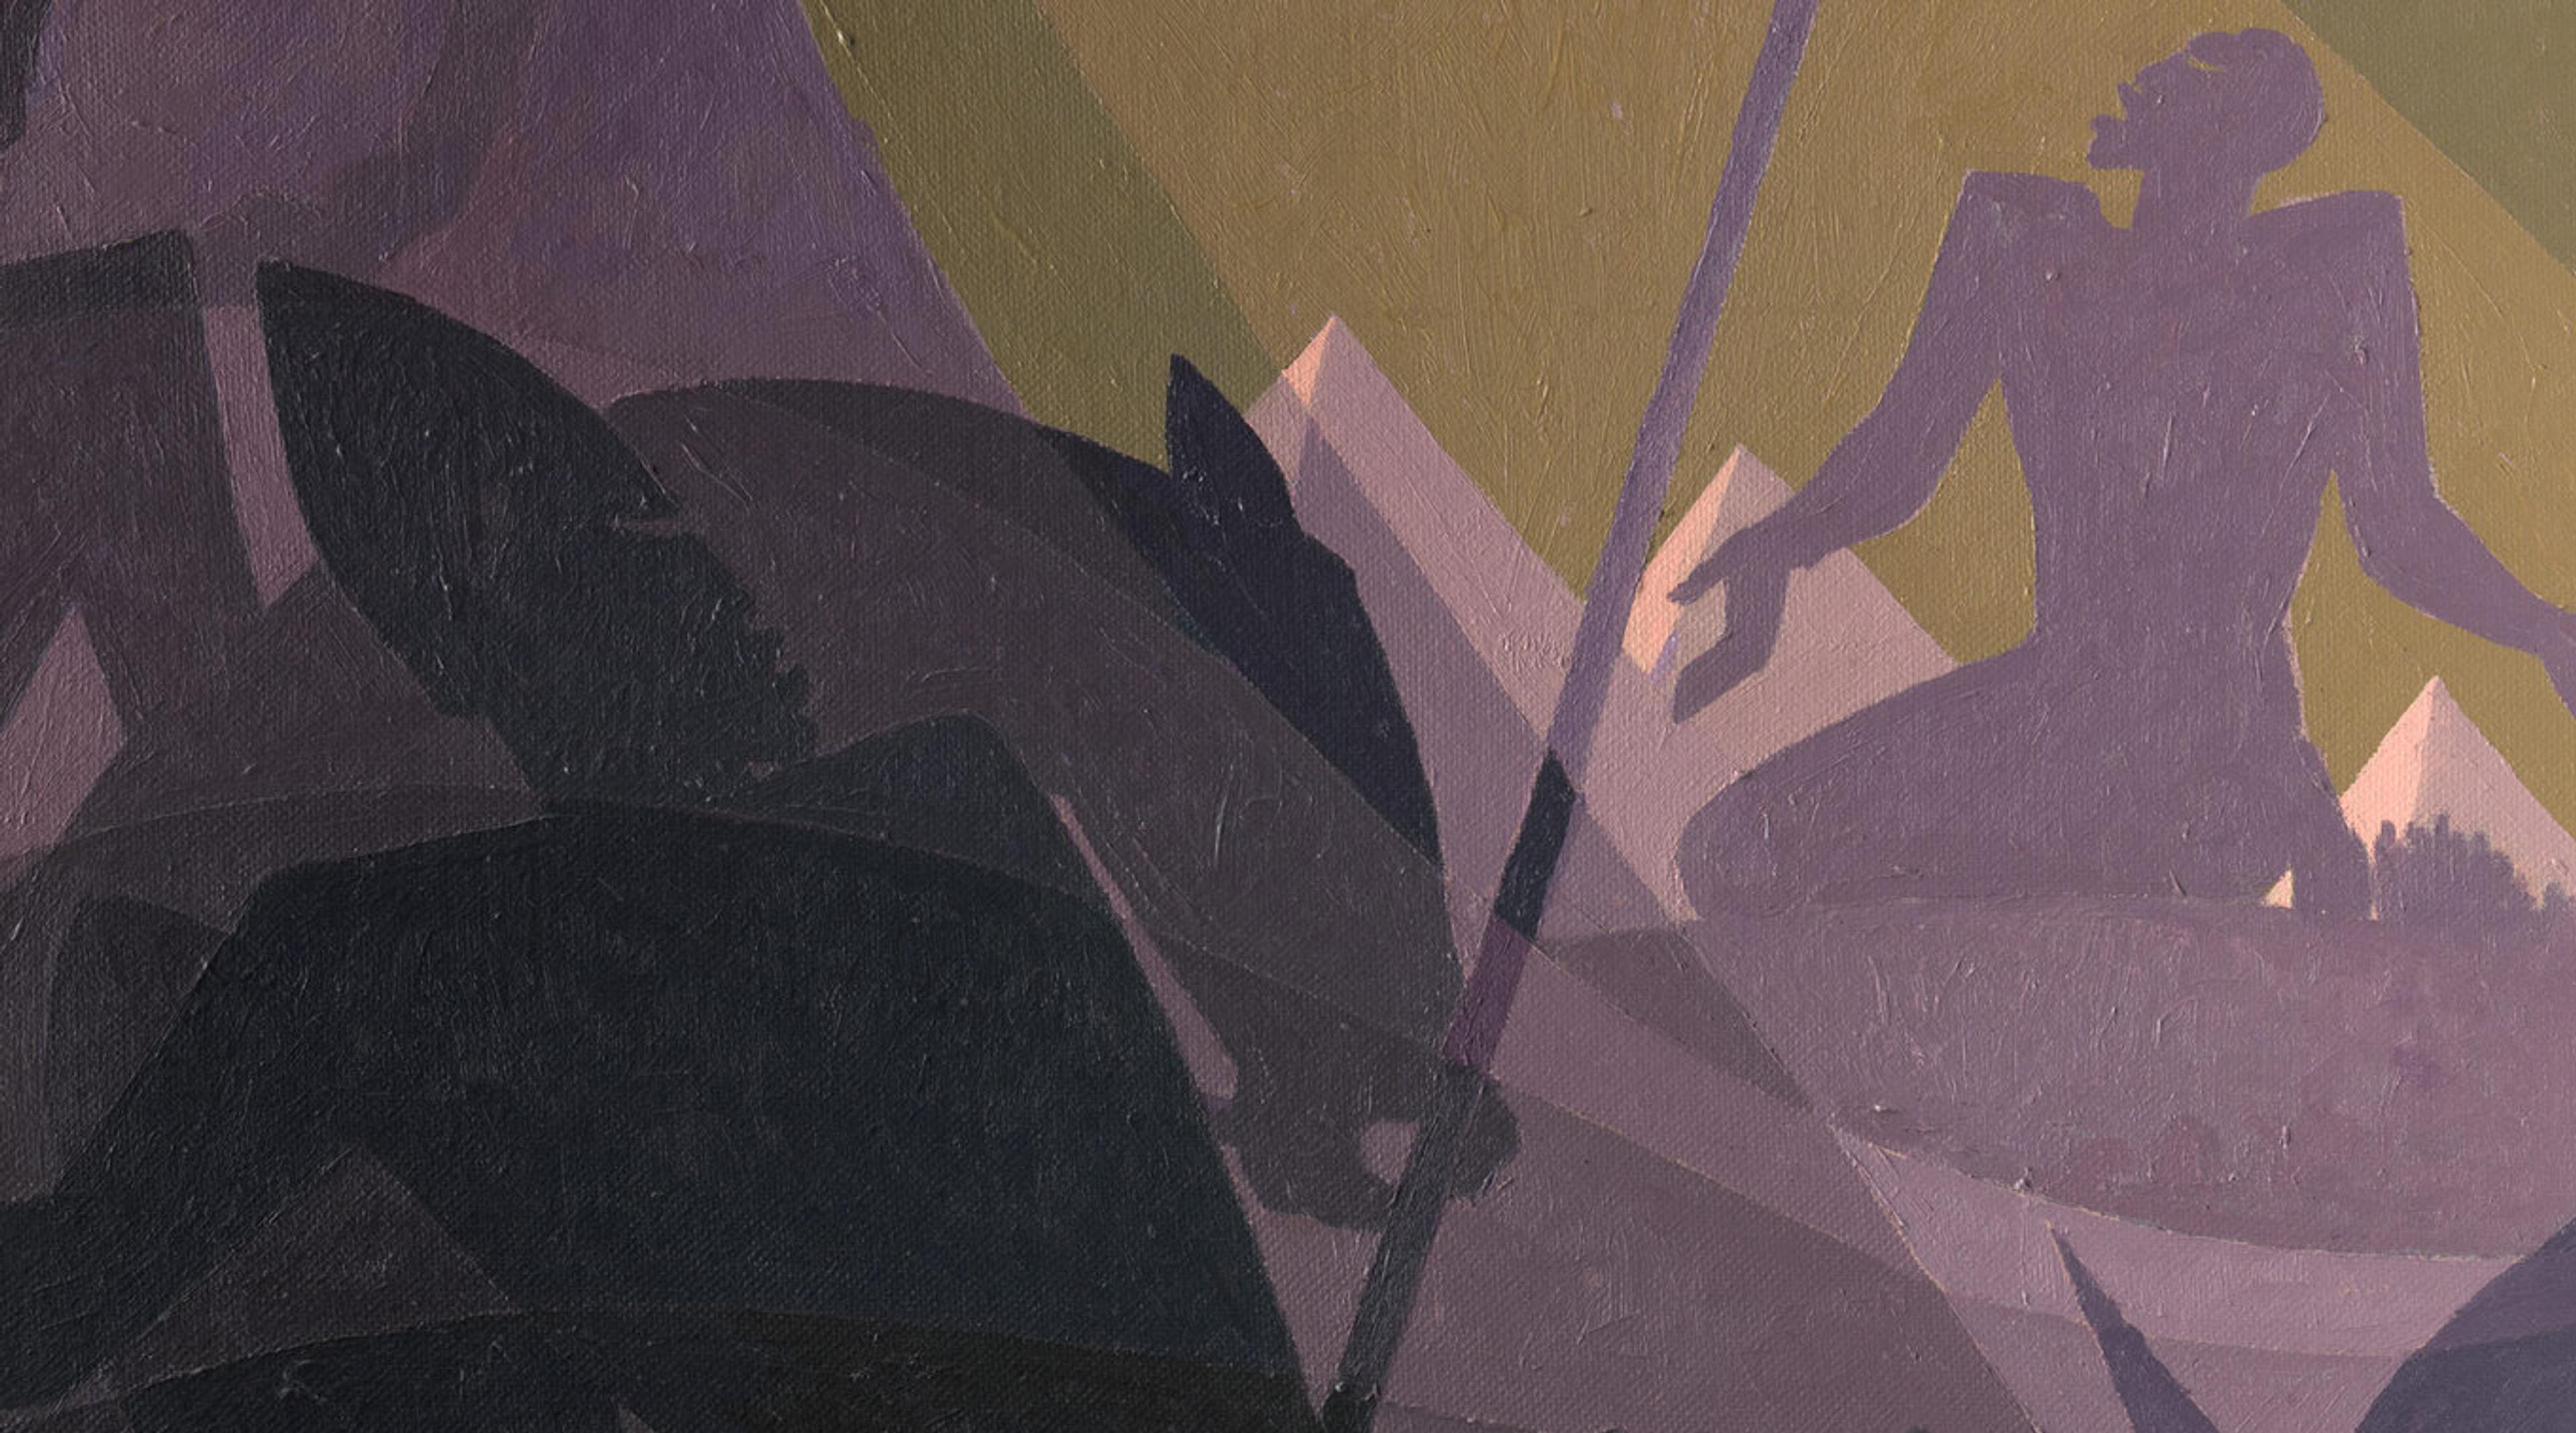 Detail of Aaron Douglas' "Let My People Go" featuring purple silhouetted figures against a yellow-green background.